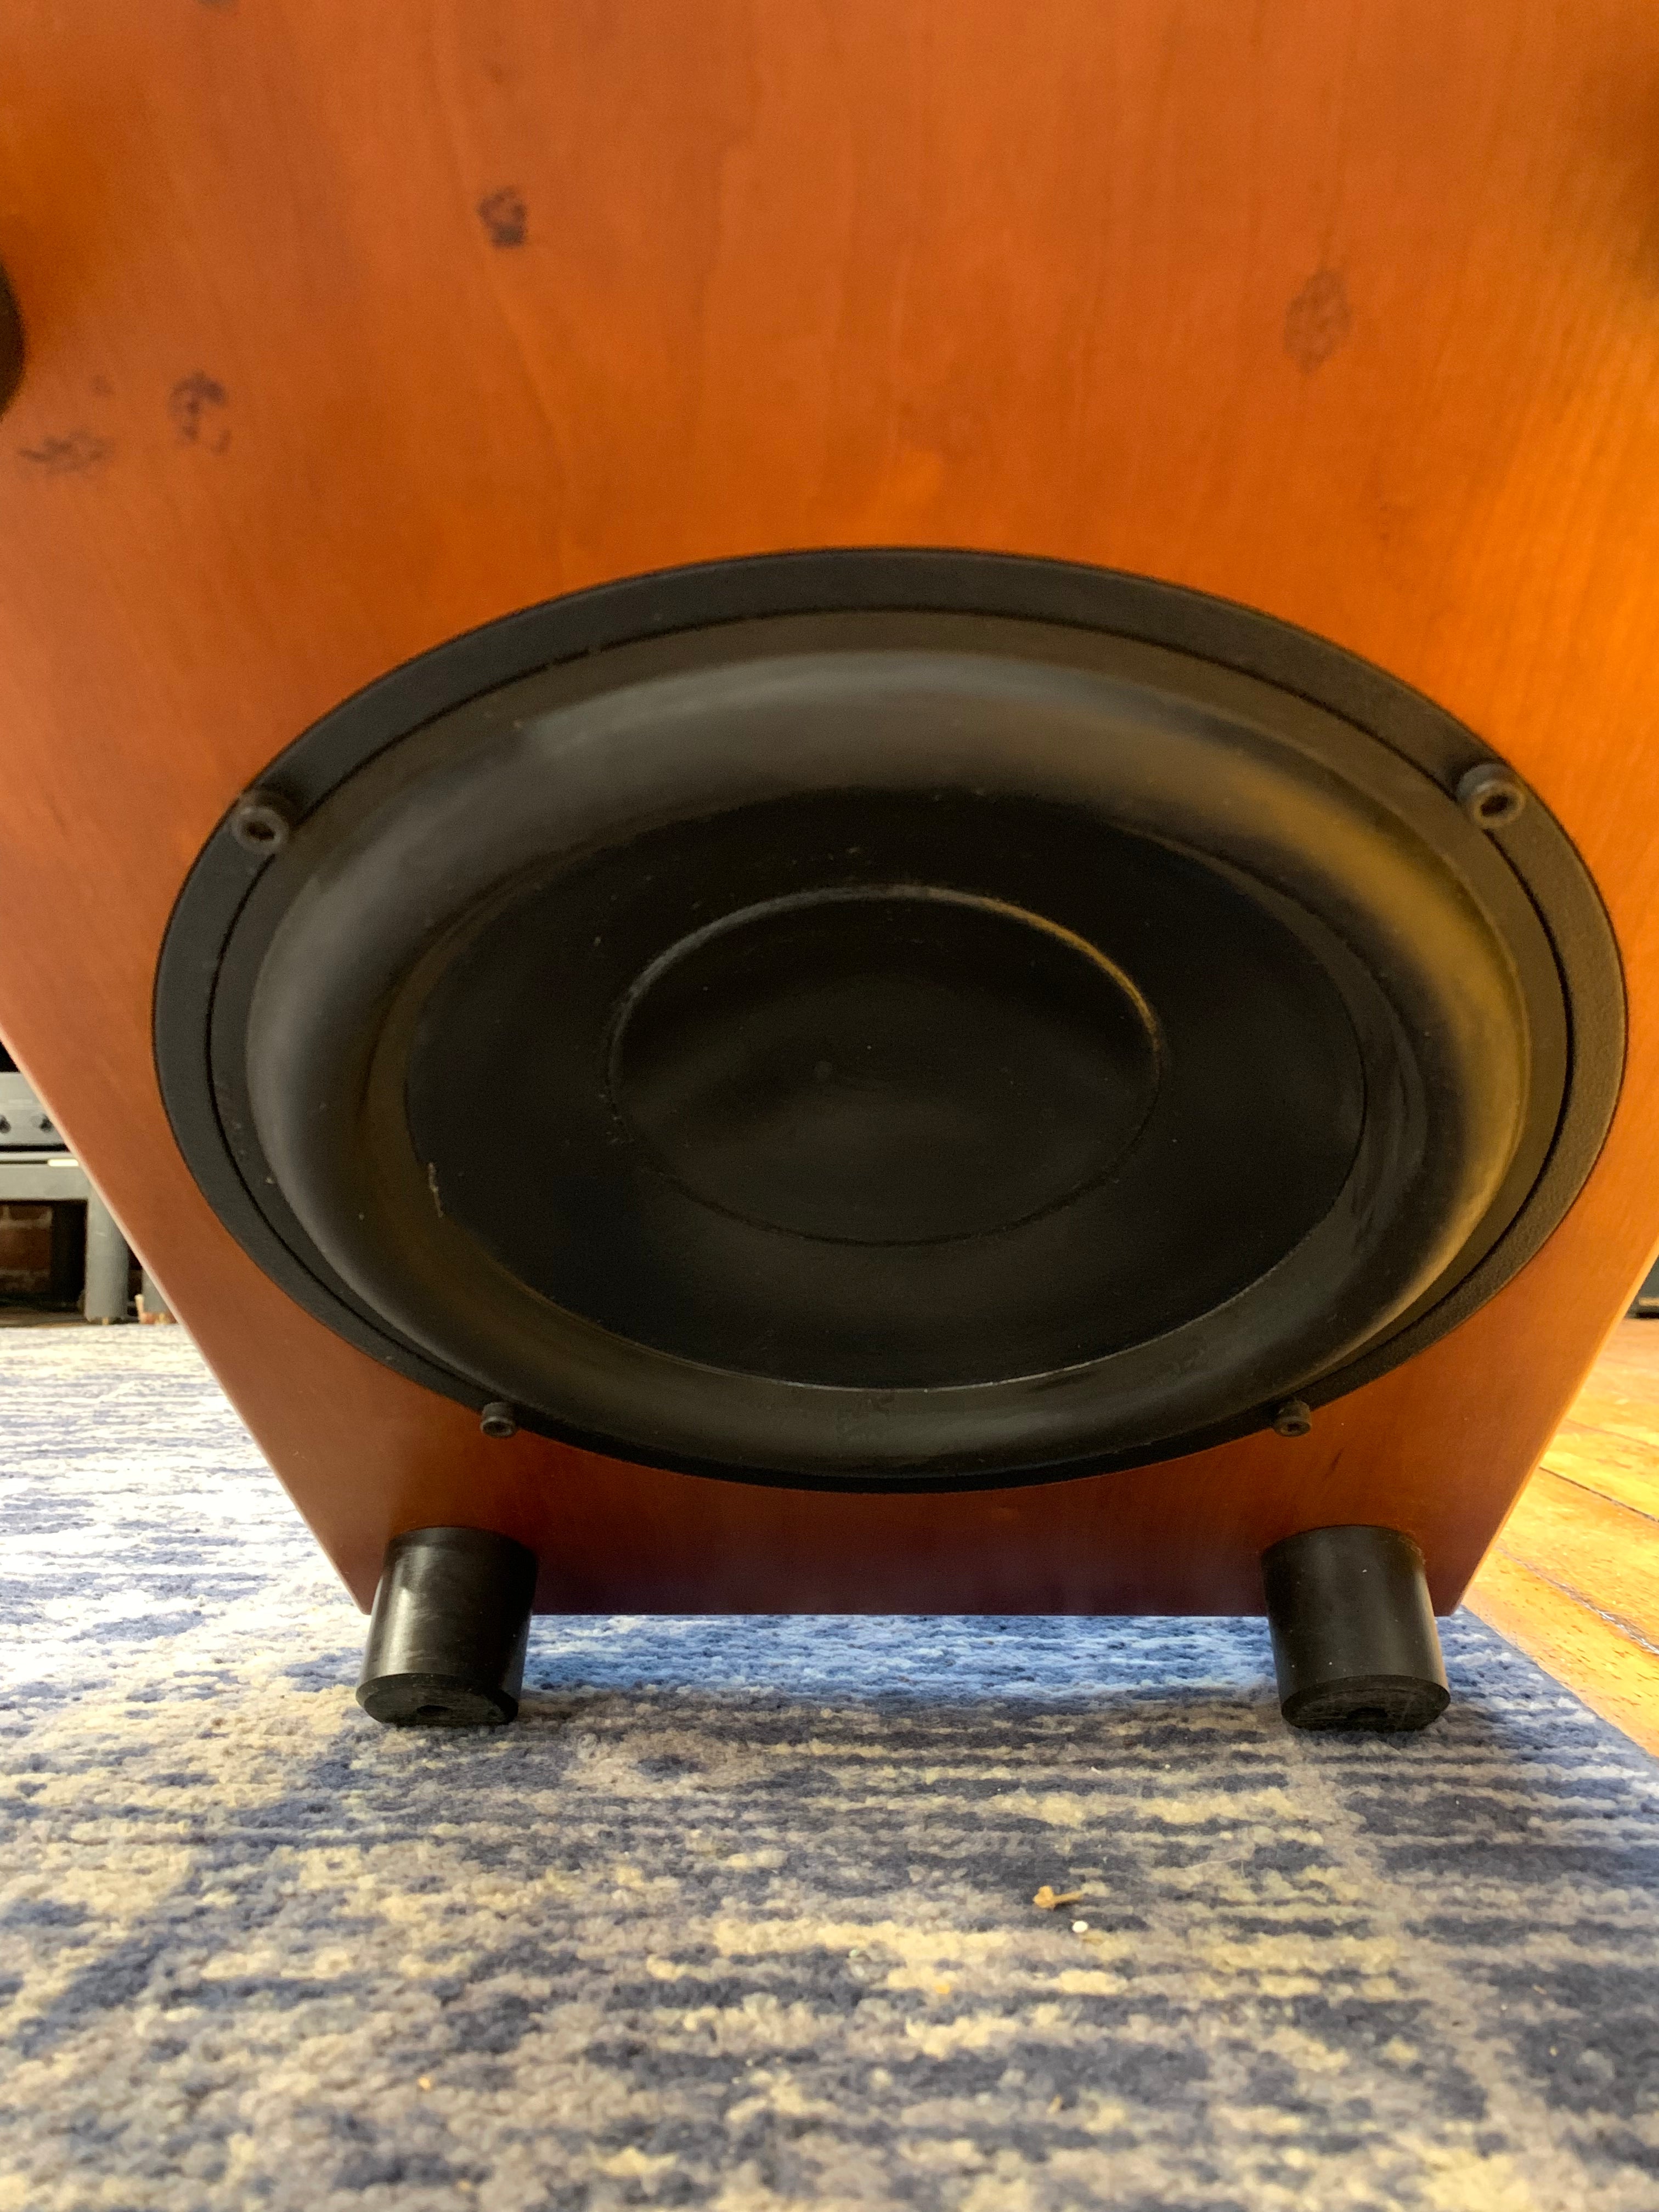 REL Strata III Subwoofer, Beautiful Cherry Finish - SOLD